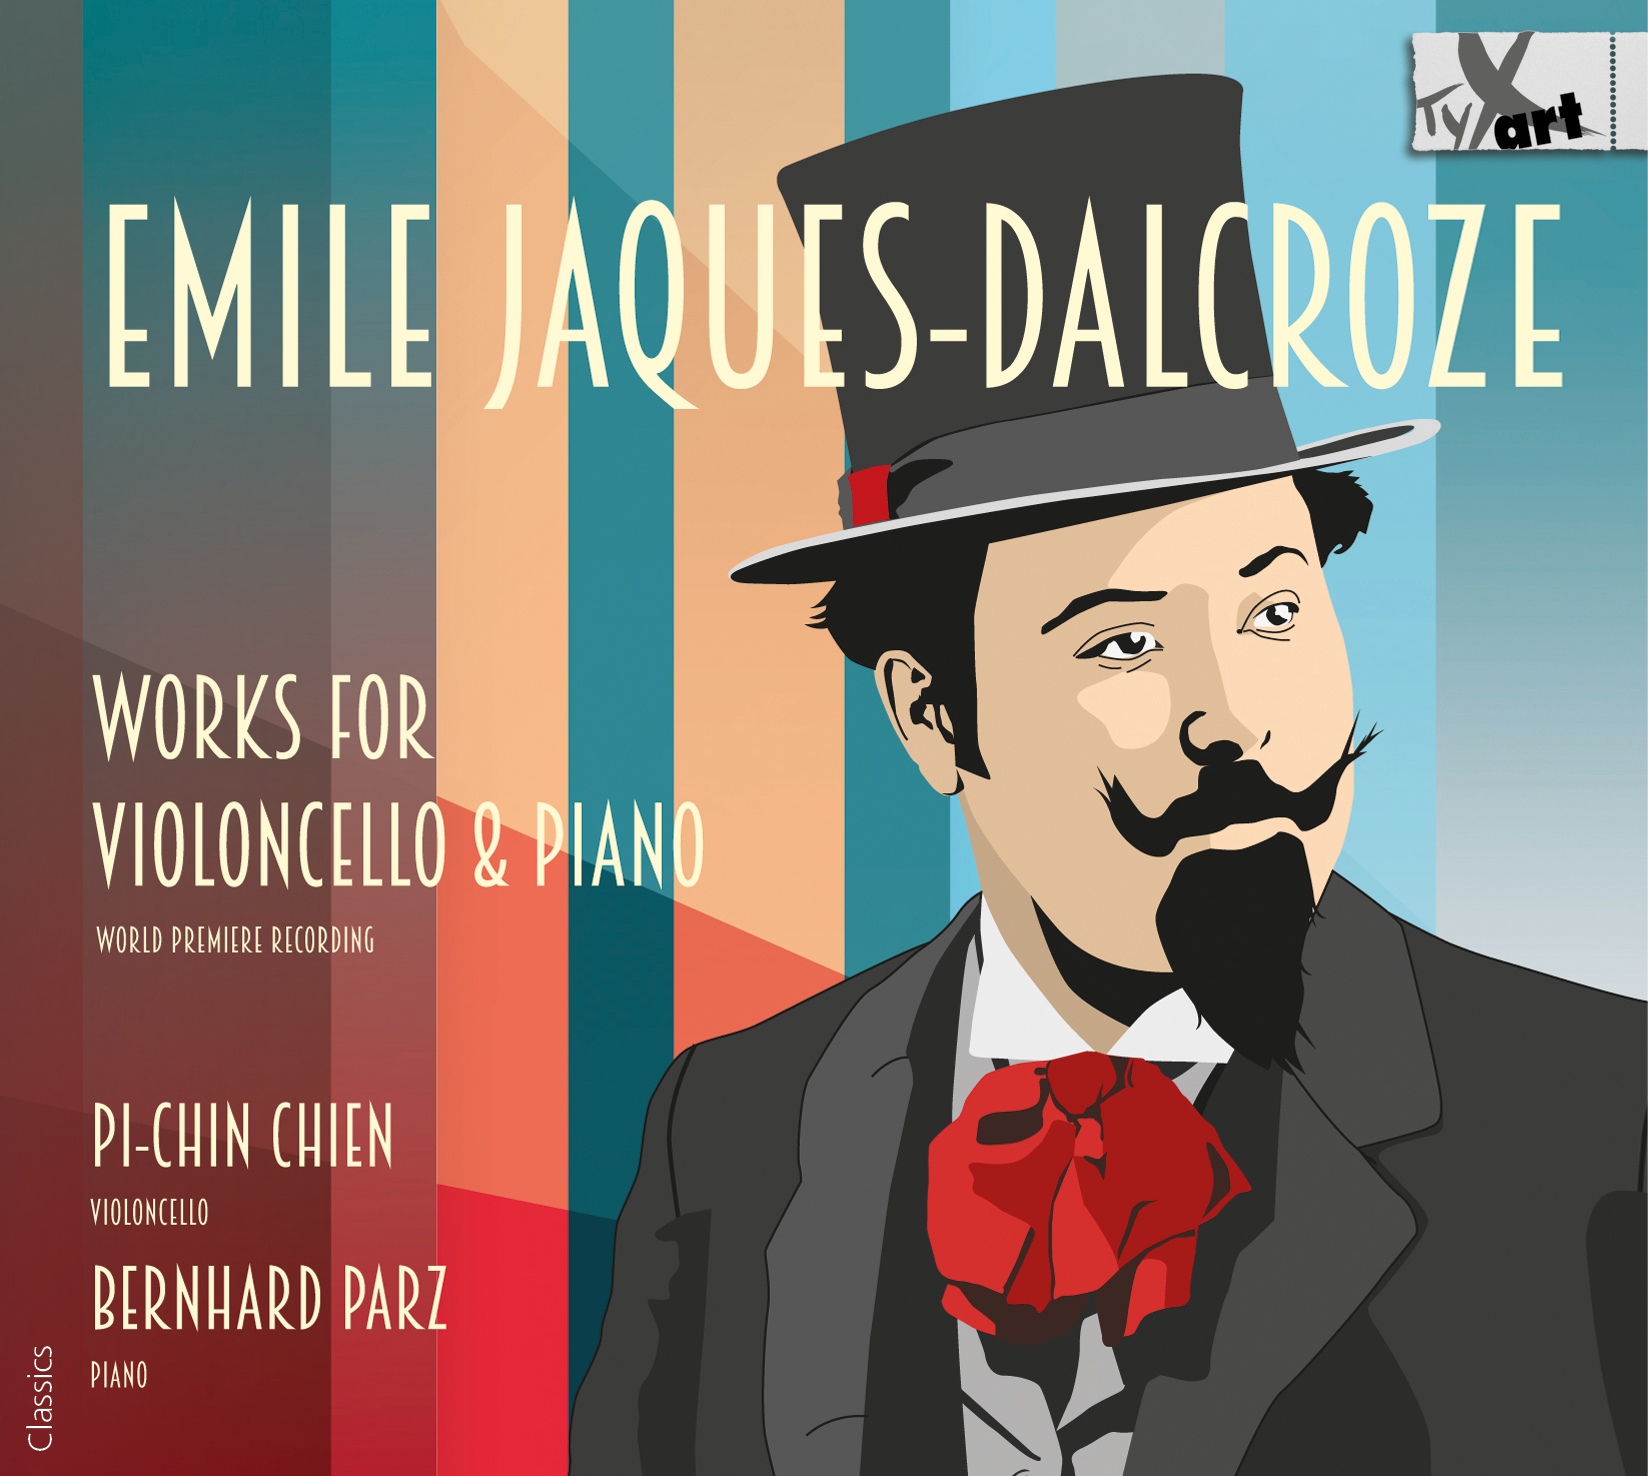 Emile Jaques-Dalcroze: Works for Cello and Piano - Pi-Chin Chien and Bernhard Parz